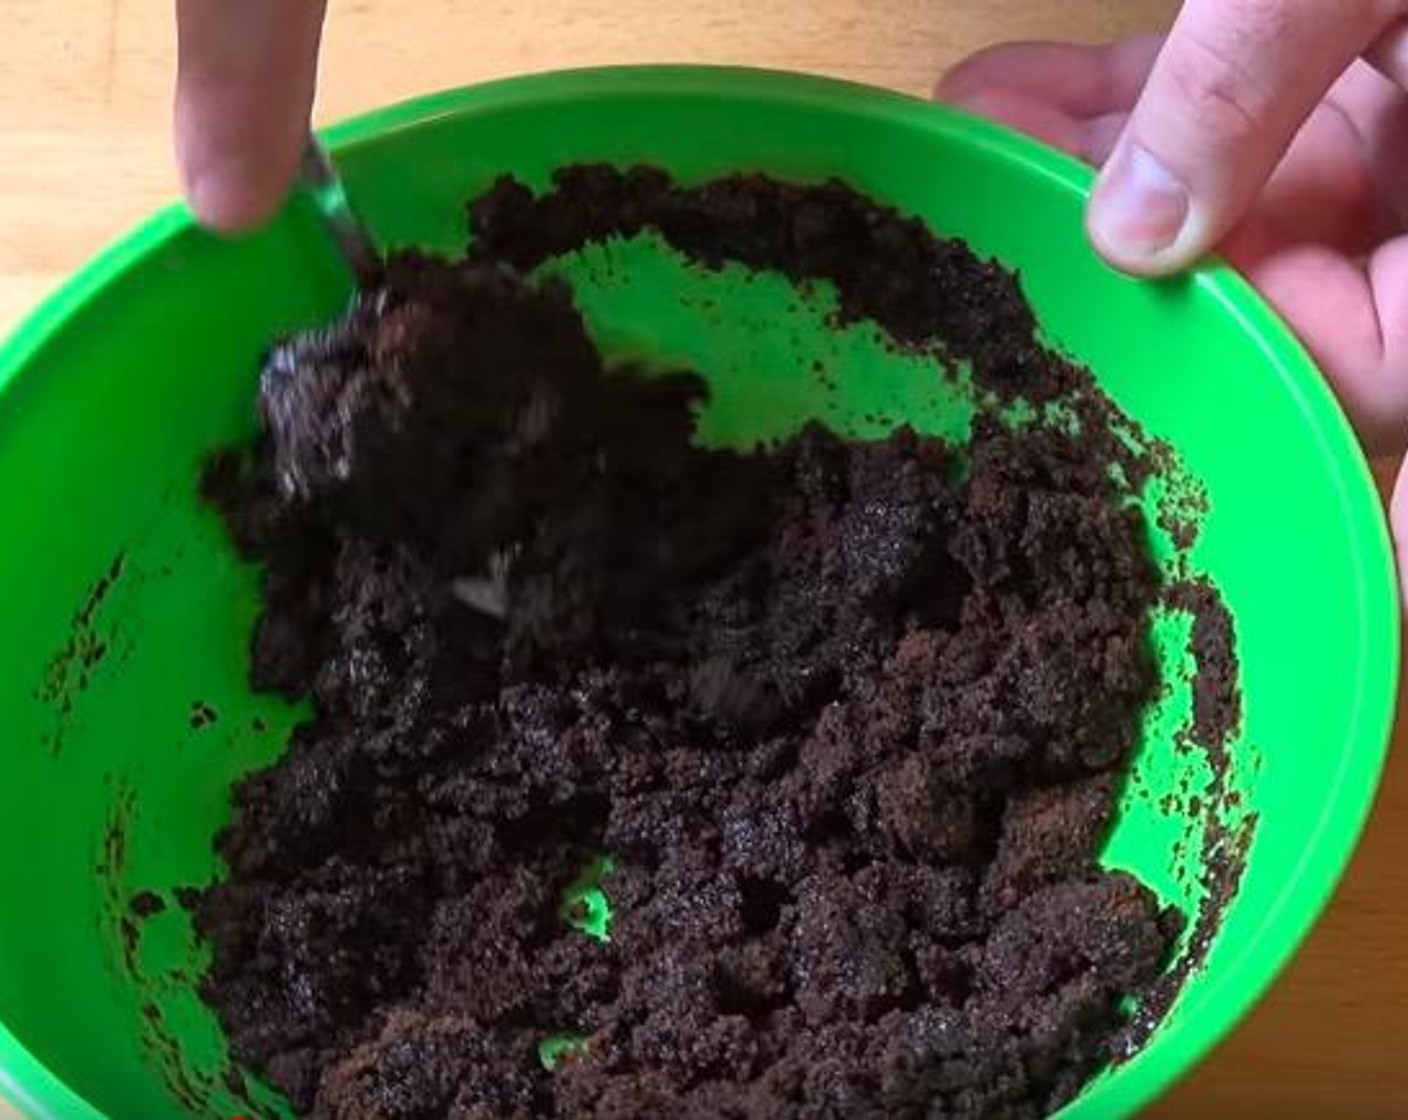 step 1 In a large mixing bowl, add Chocolate Cookies (9 oz) and Butter (1/3 cup). Stir together until mixture has the texture of wet sand.